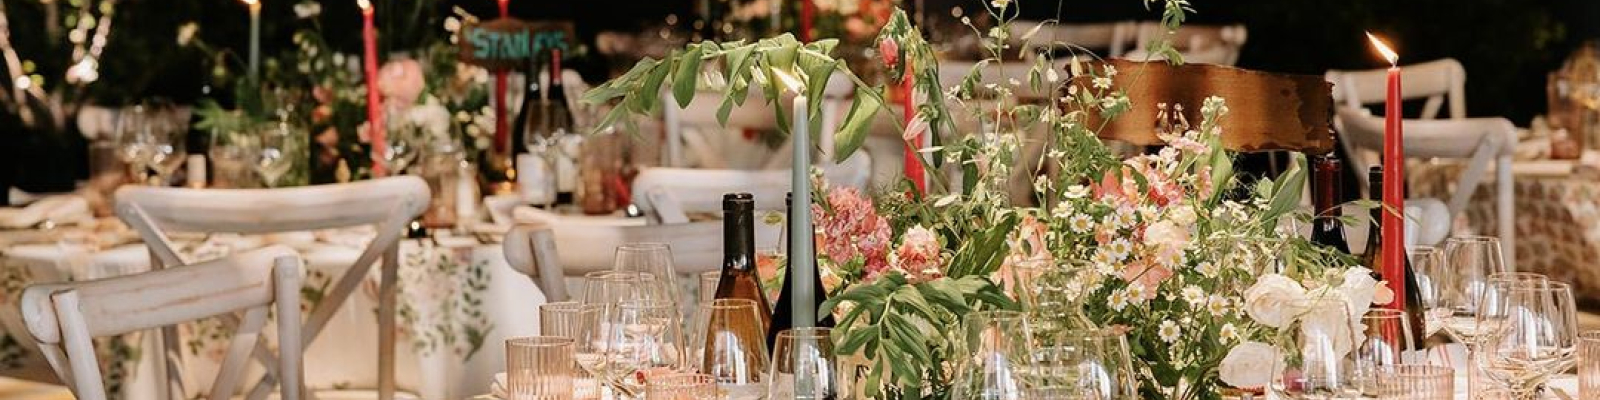 Tables for a wedding decorated with flowers, candles and wine glasses